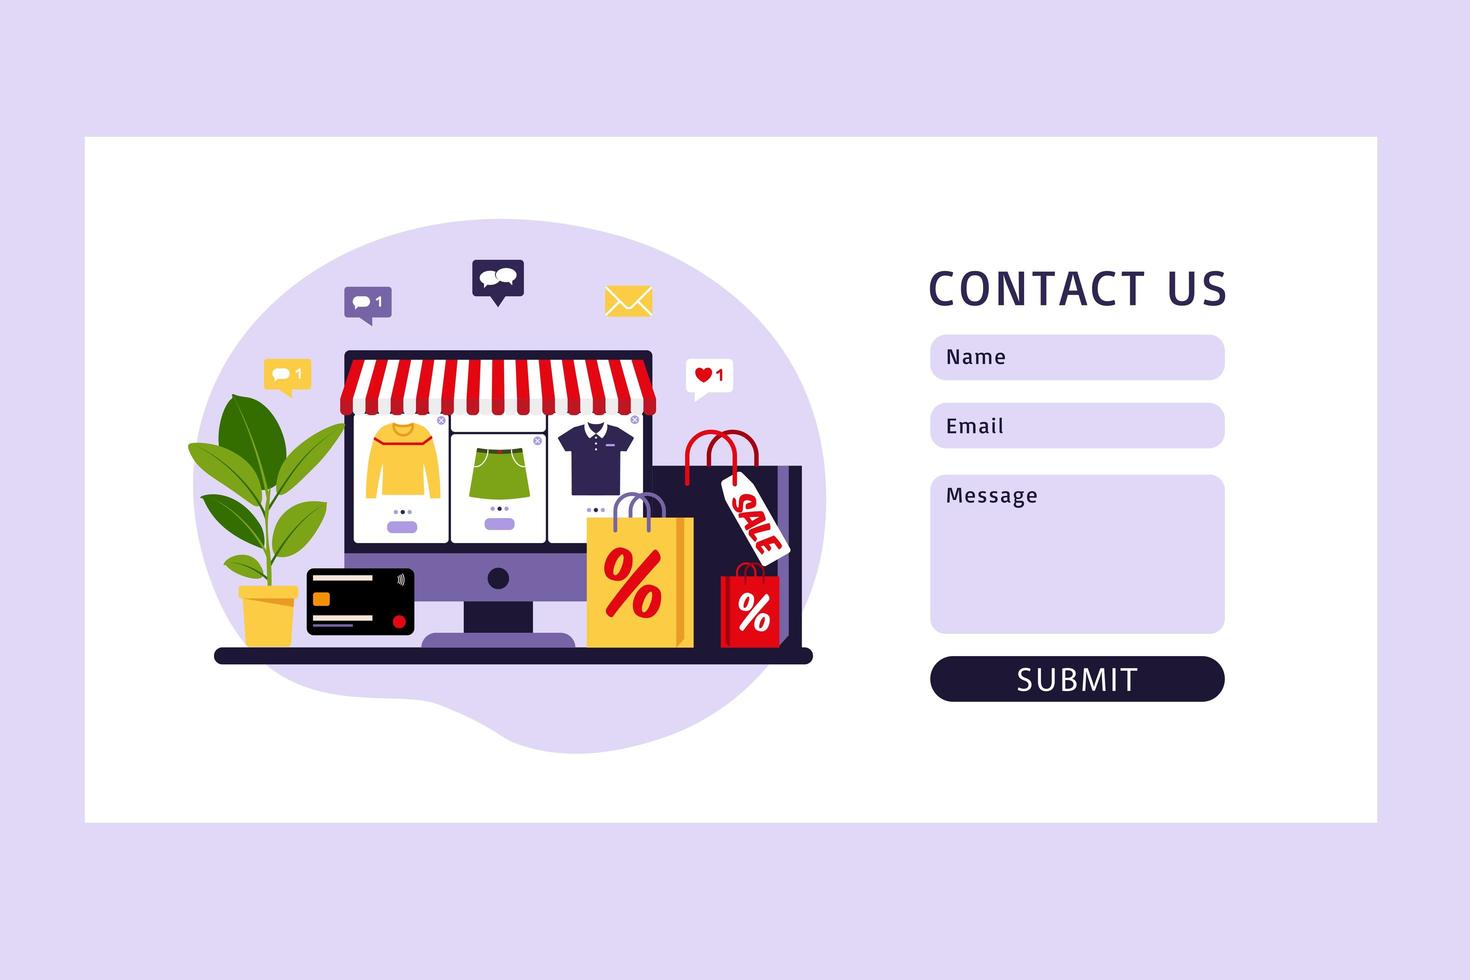 Contact us form. Online shopping. Modern flat concept for web design. vector